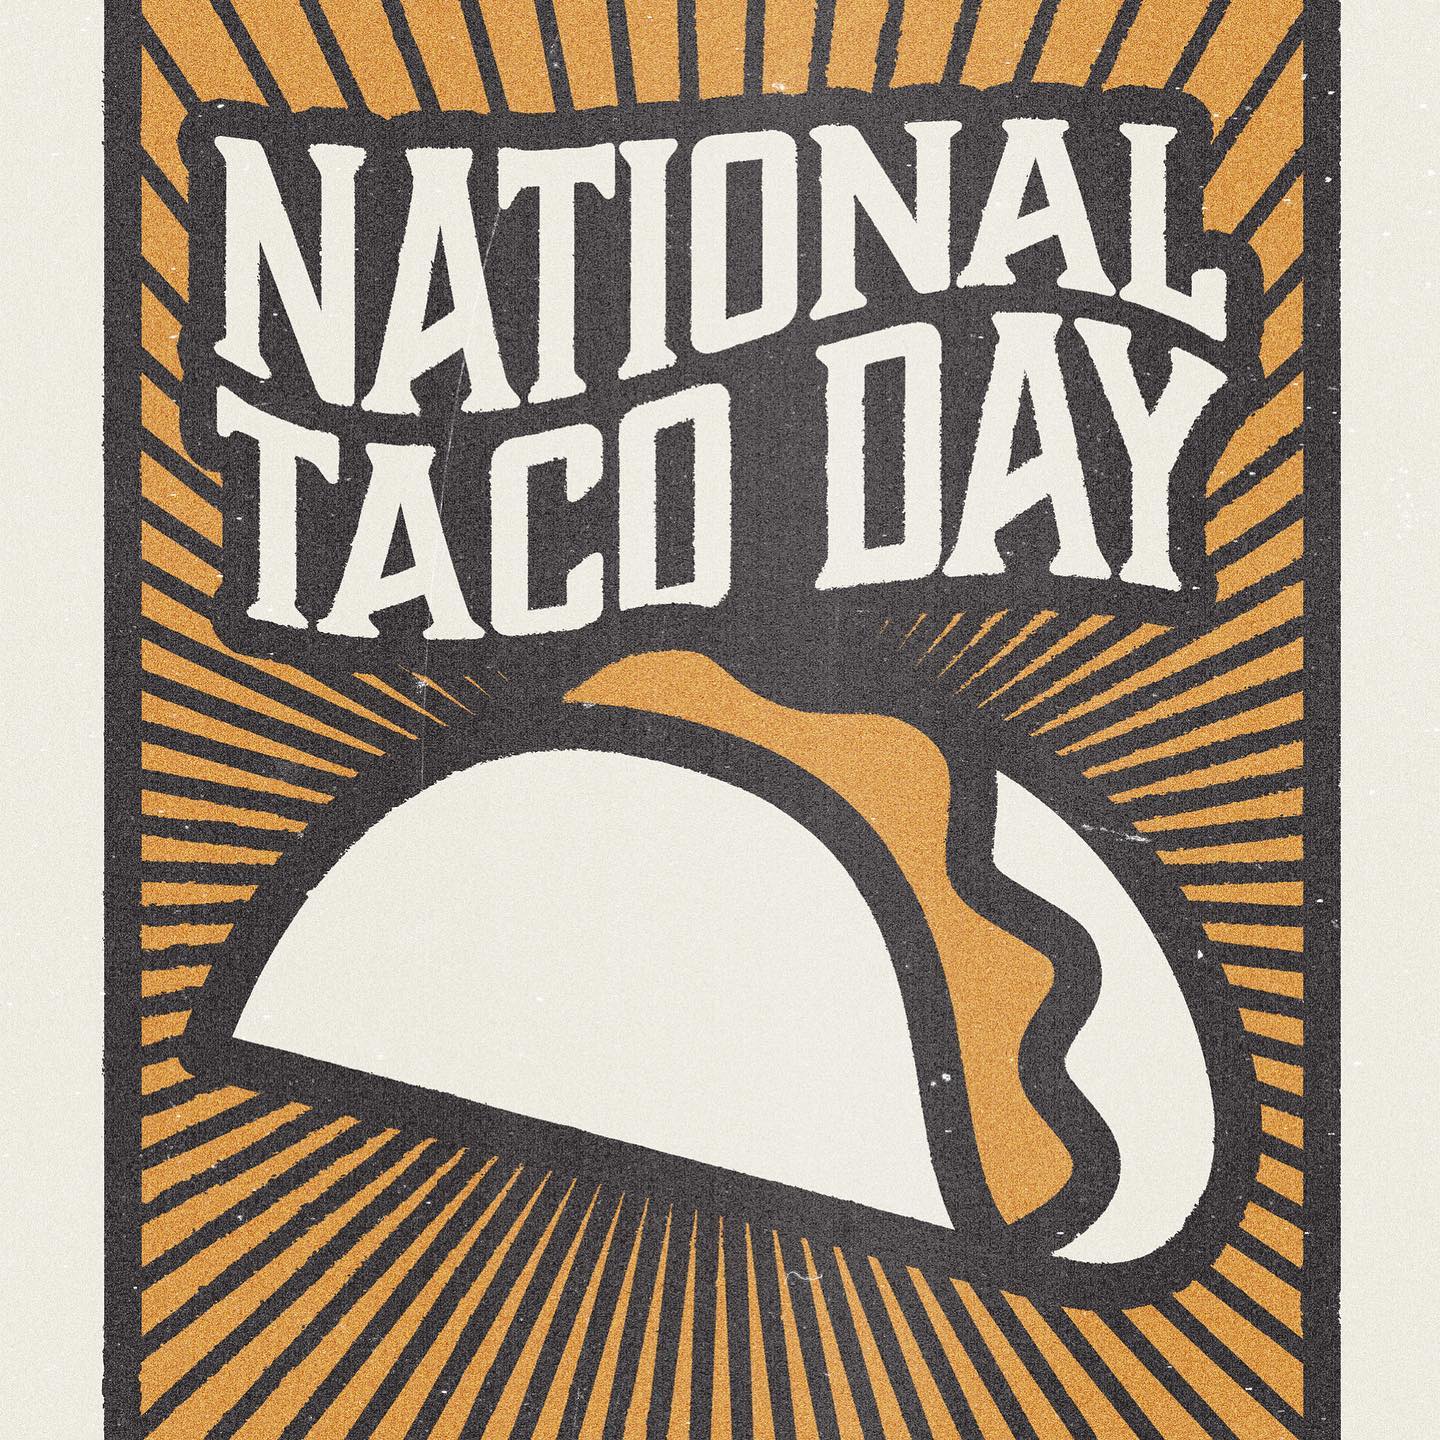 It’s National Taco Day AND it’s Taco Tuesday! We’re already hungry! Who makes the best tacos?